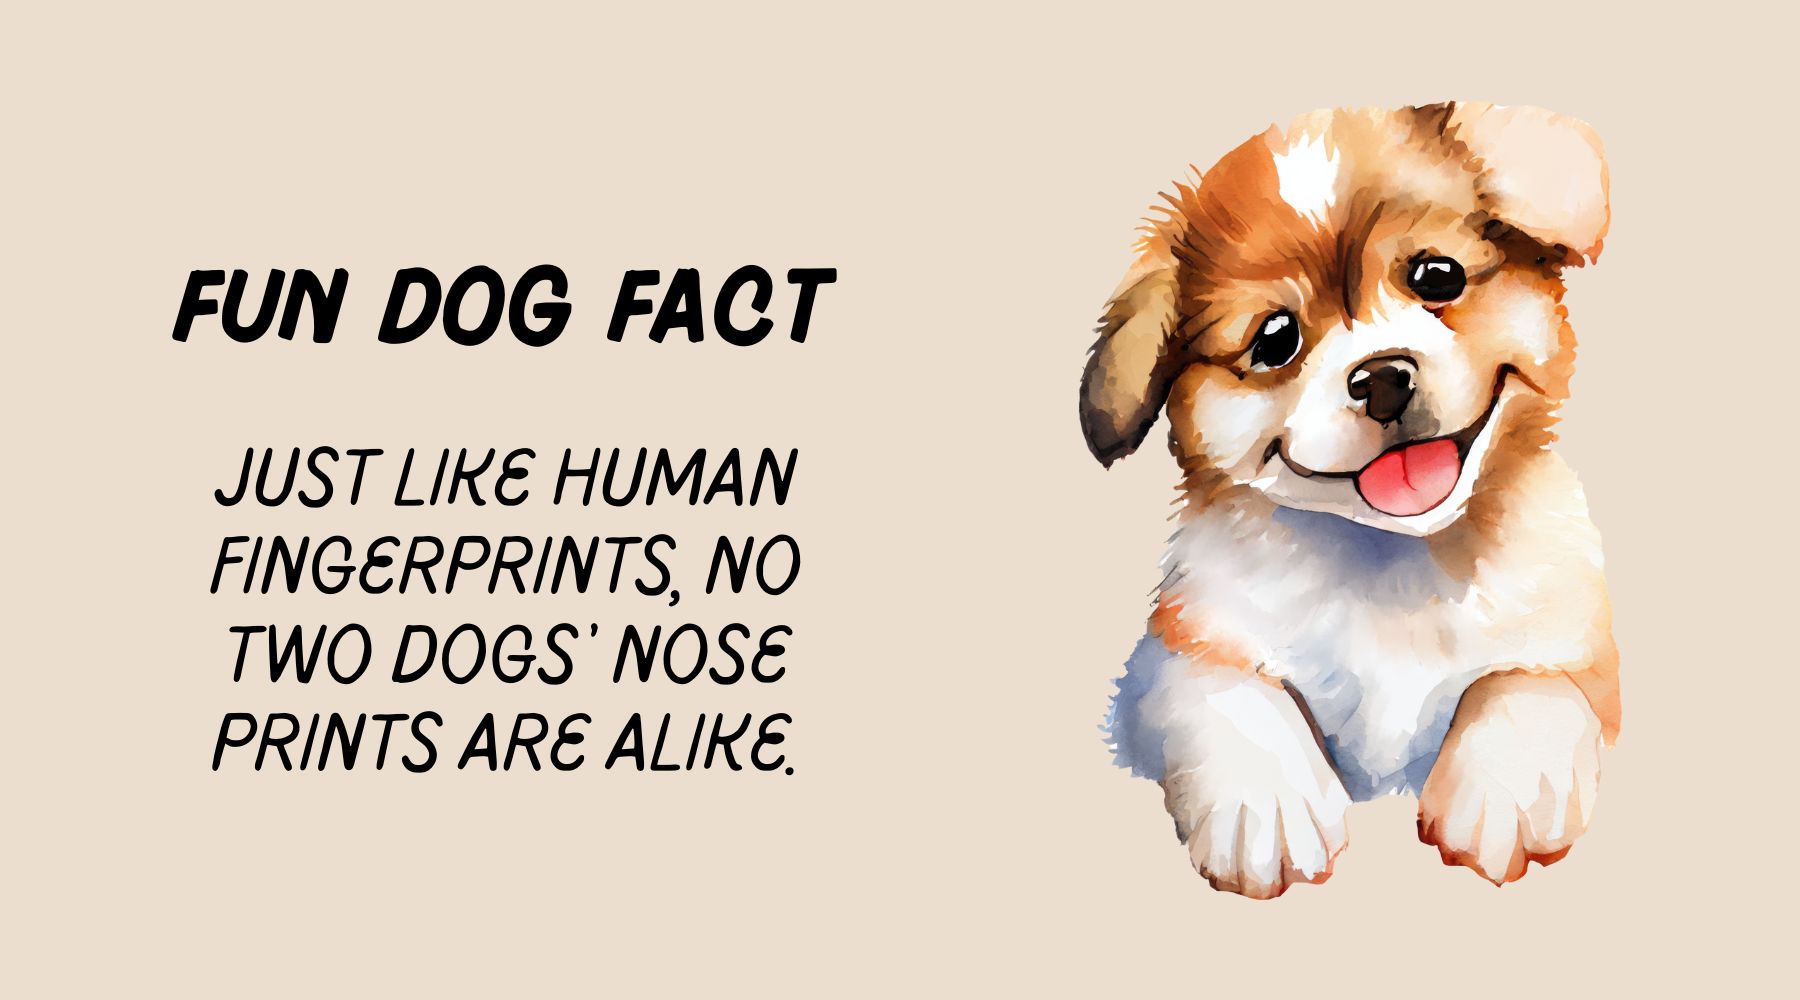 10 Fascinating Fun Facts About Dogs